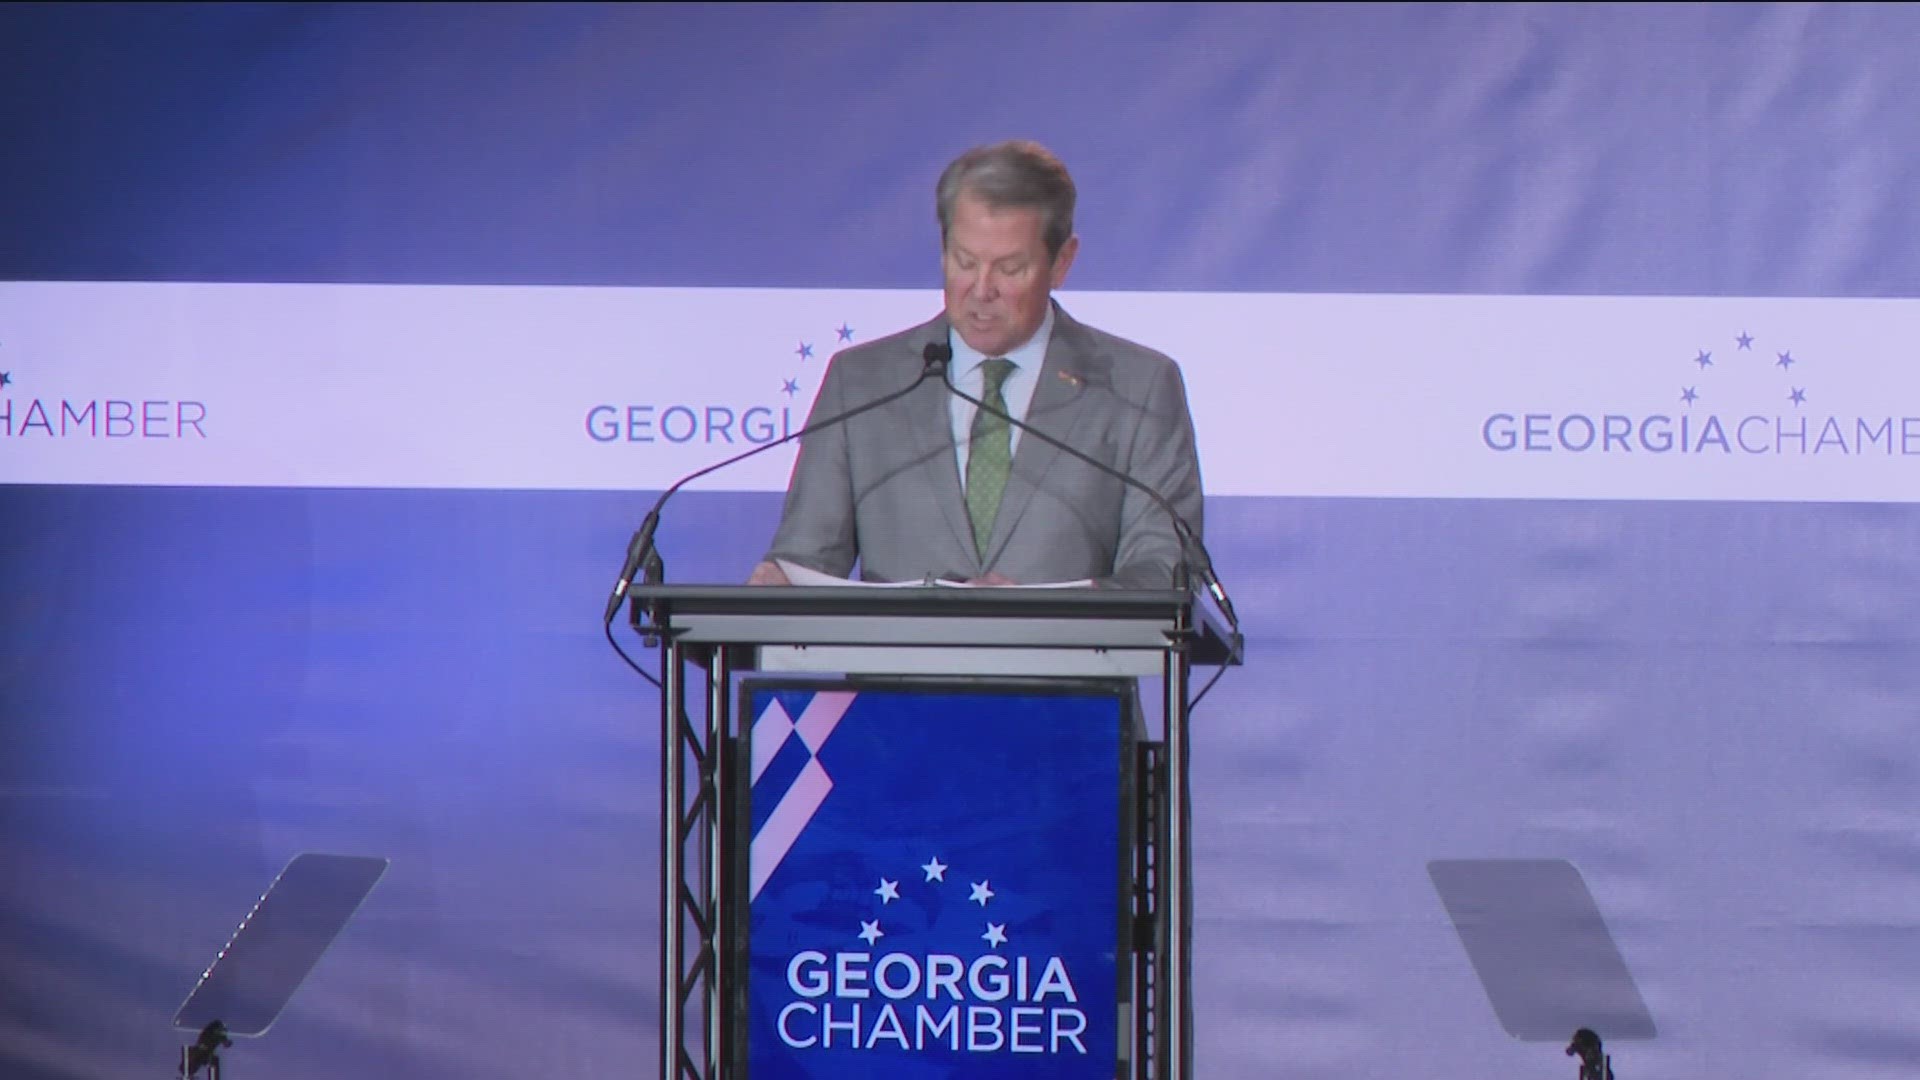 Gov. Kemp said in remarks at Wednesday's annual Eggs and Issues event that he plans to continue to prioritize business development in Georgia.